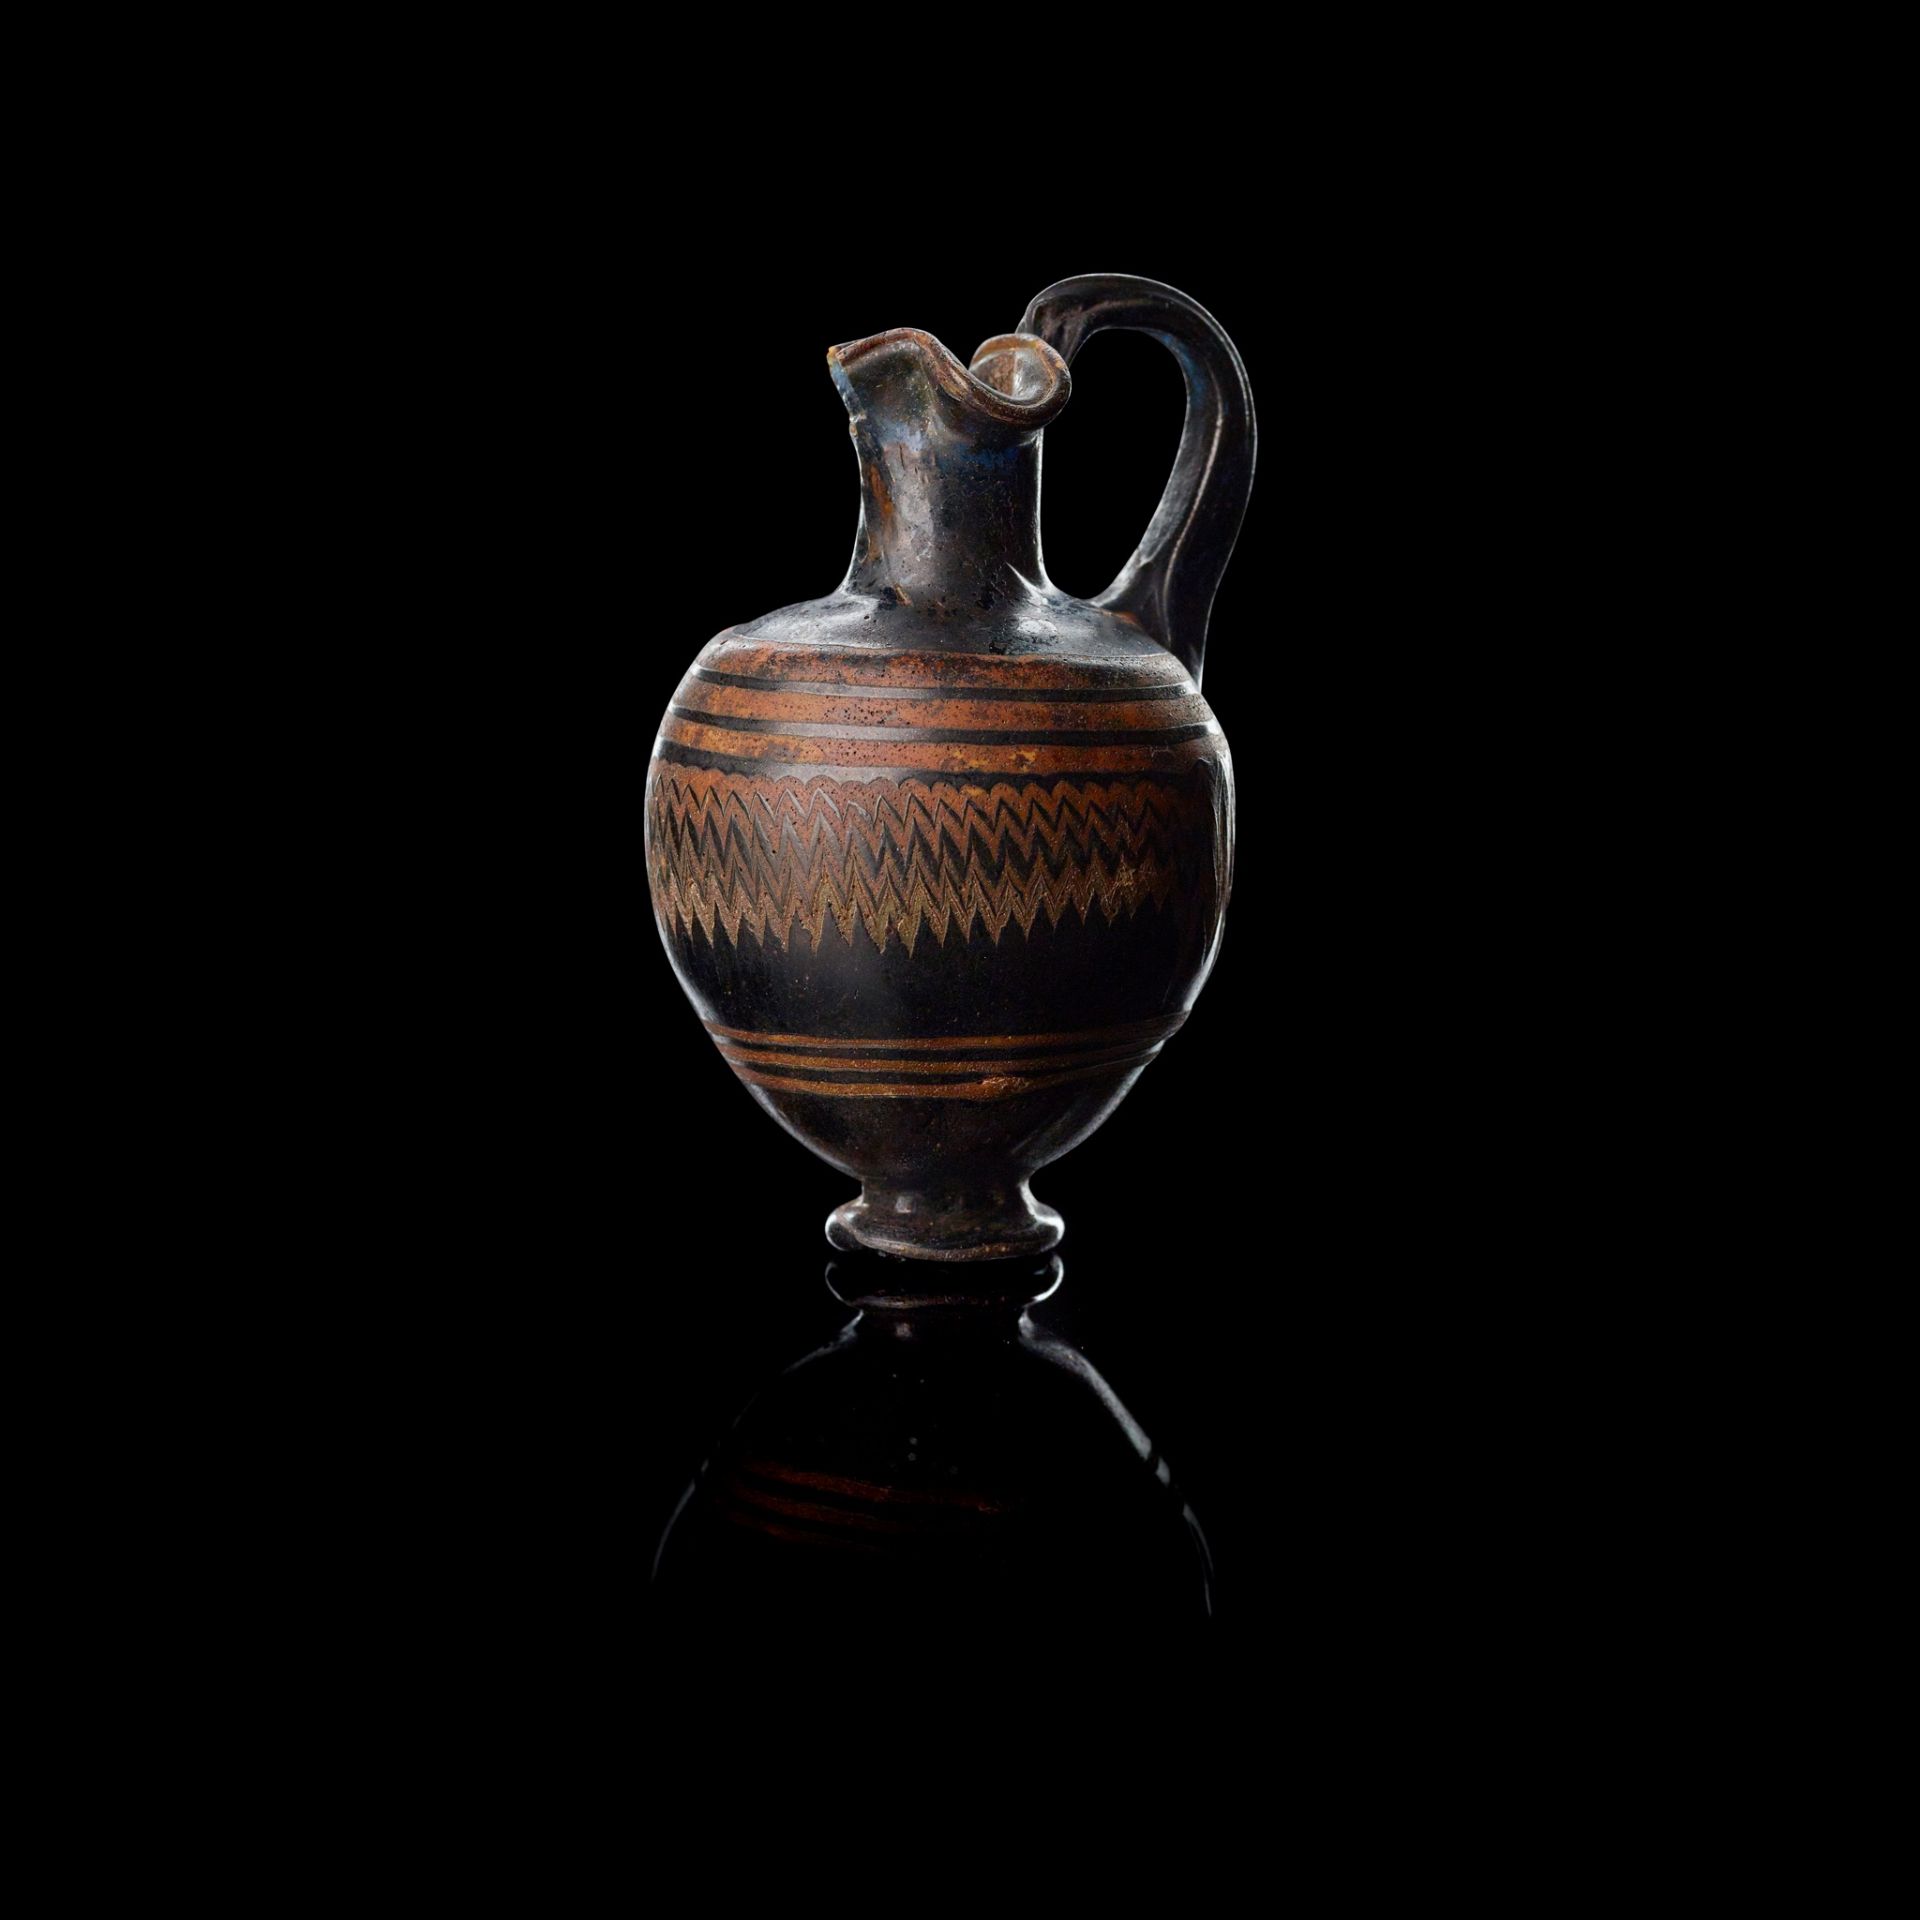 EASTERN MEDITERRANEAN MINIATURE CORE FORMED GLASS OINOCHOE 6TH - 5TH CENTURY BCE, 19TH C PROVENANCE - Image 2 of 2